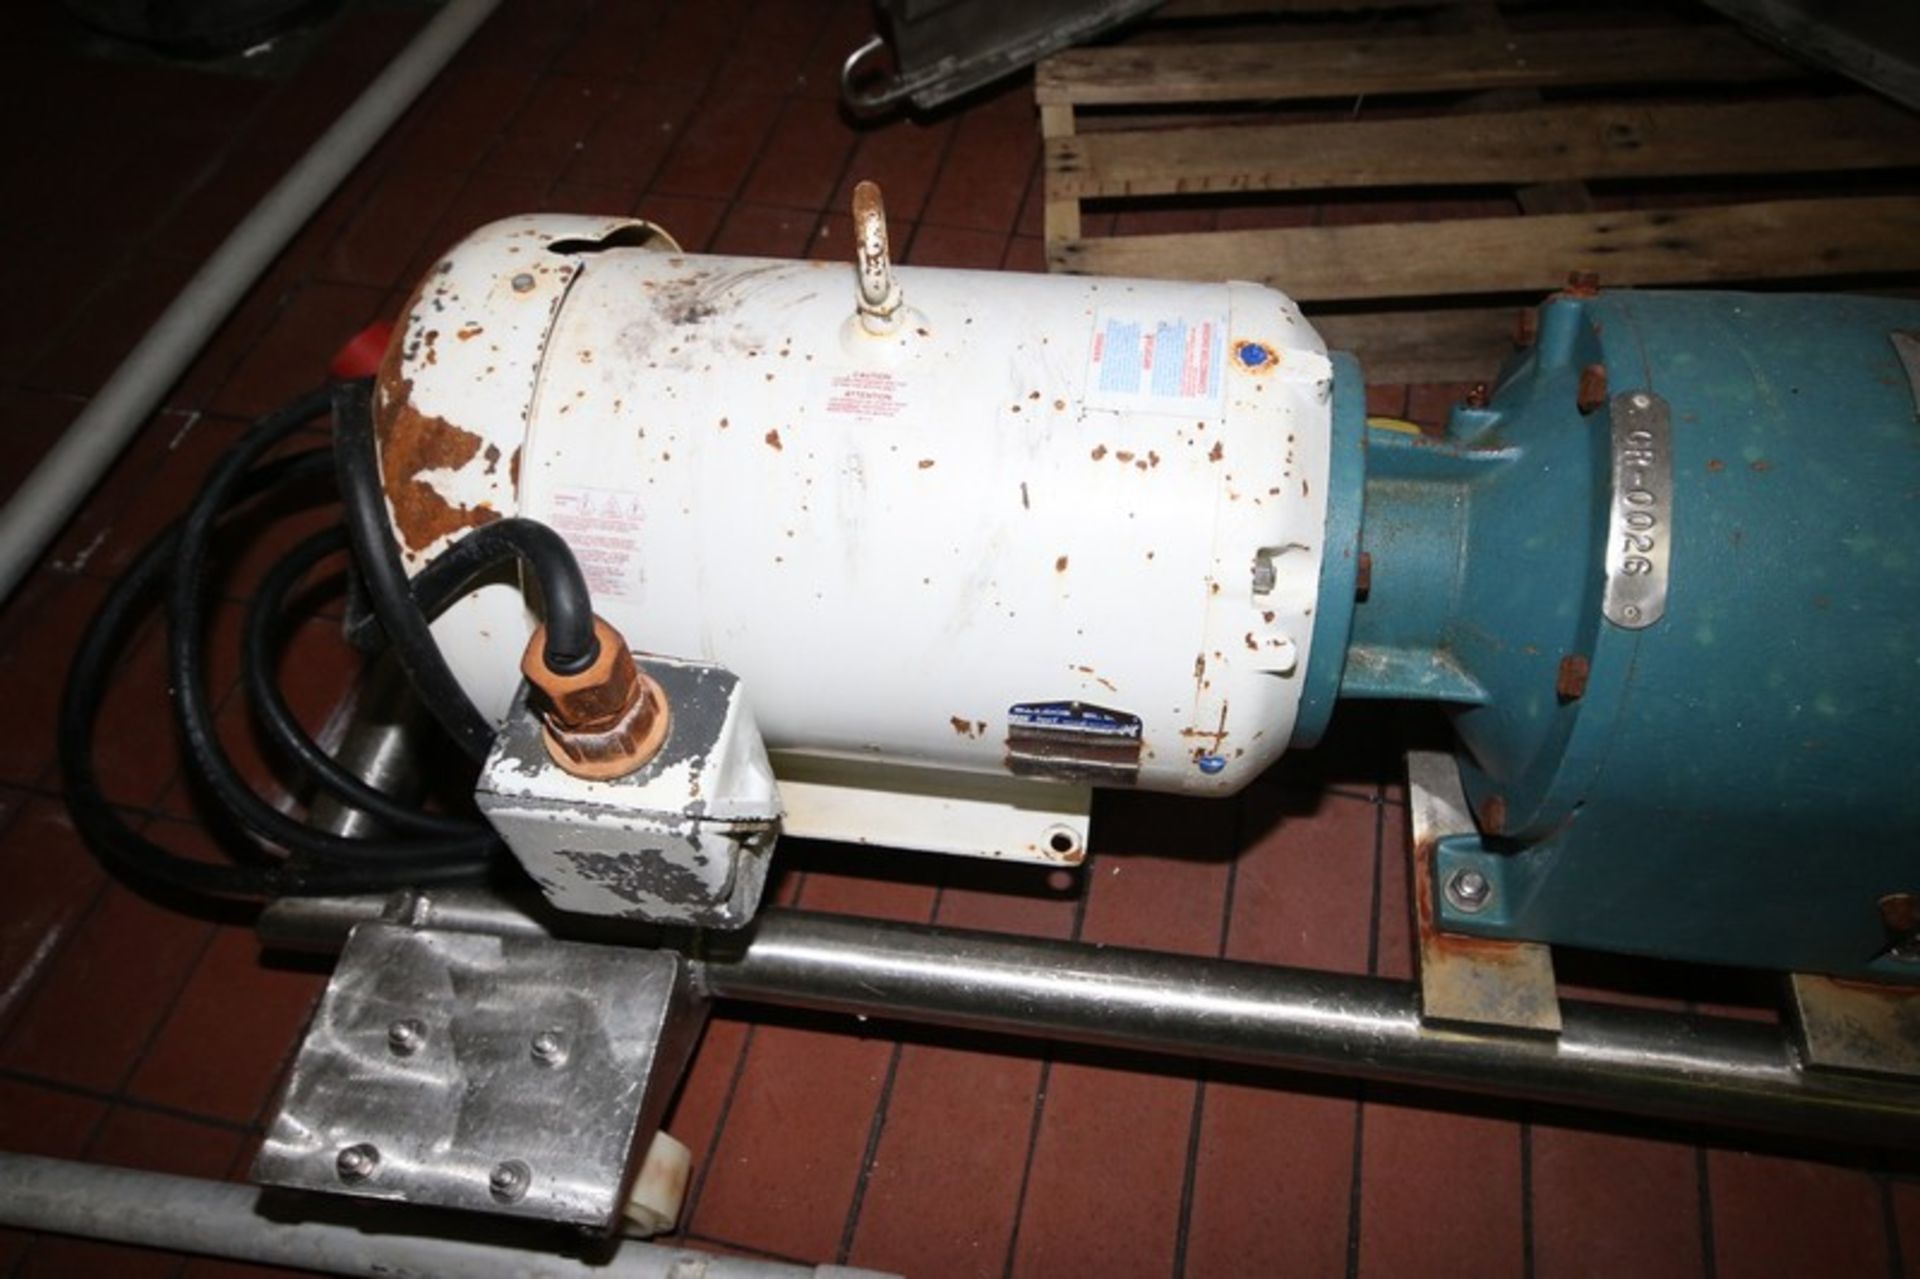 2011 SPX 20 hp Positive Displacement Pump, M/N 130 U 1, S/N 1000002616264, with Aprox. 3" Clamp Type - Image 5 of 8